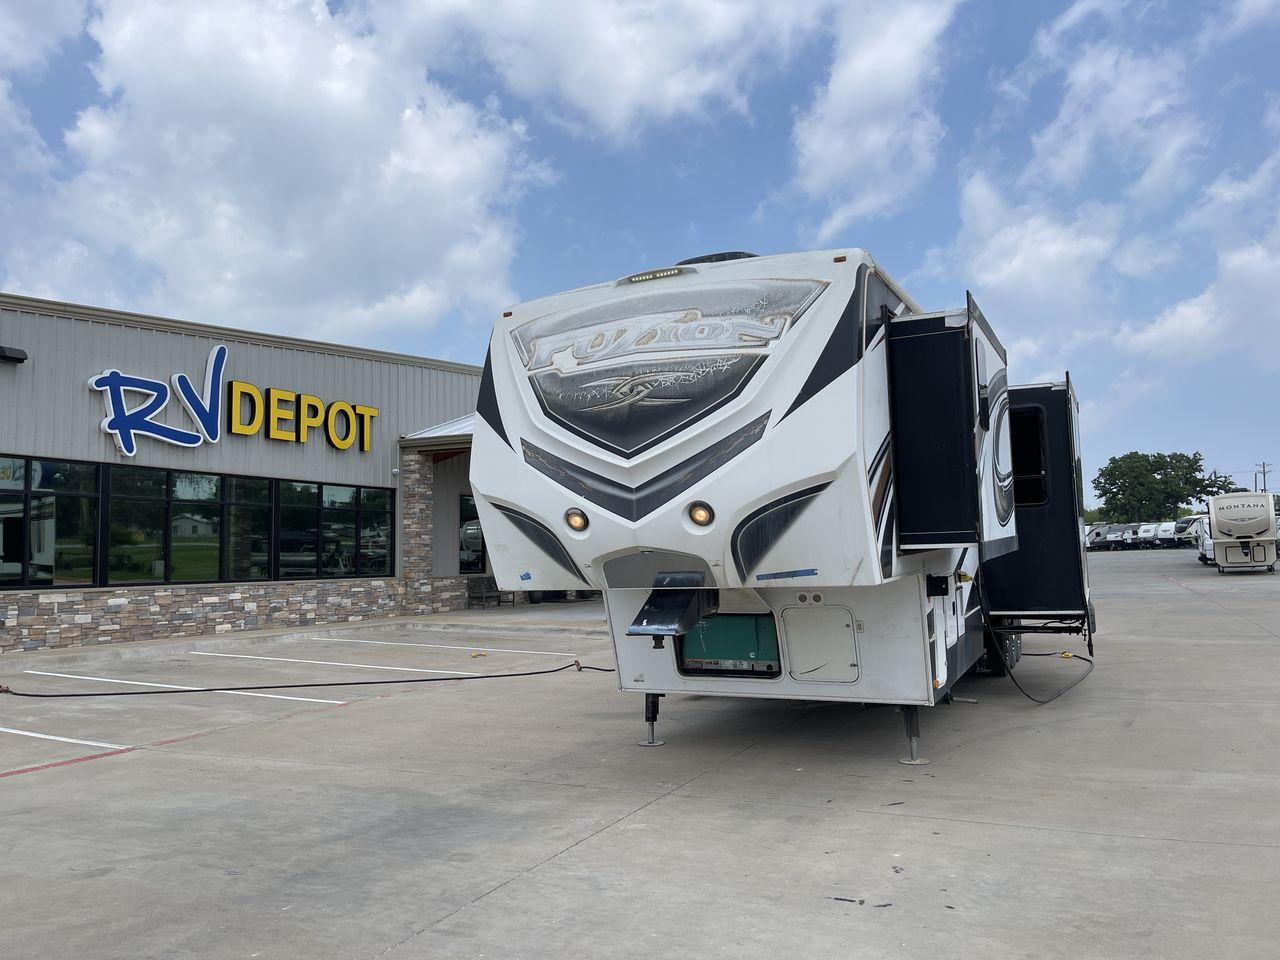 2014 WHITE KEYSTONE FUZION M-399 (4YDF39939EF) , Length: 41 ft. | Dry Weight: 14,100 lbs. | Gross Weight: 18,000 lbs. | Slides: 3 transmission, located at 4319 N Main St, Cleburne, TX, 76033, (817) 678-5133, 32.385960, -97.391212 - The 2014 Keystone Fuzion M-399 offers exceptional value for its price. With its white exterior color, this RV stands out on the road and is sure to turn heads wherever you go. Measuring 41 ft. in length, this toy hauler provides ample space for you and your loved ones to relax and enjoy your travels - Photo #0